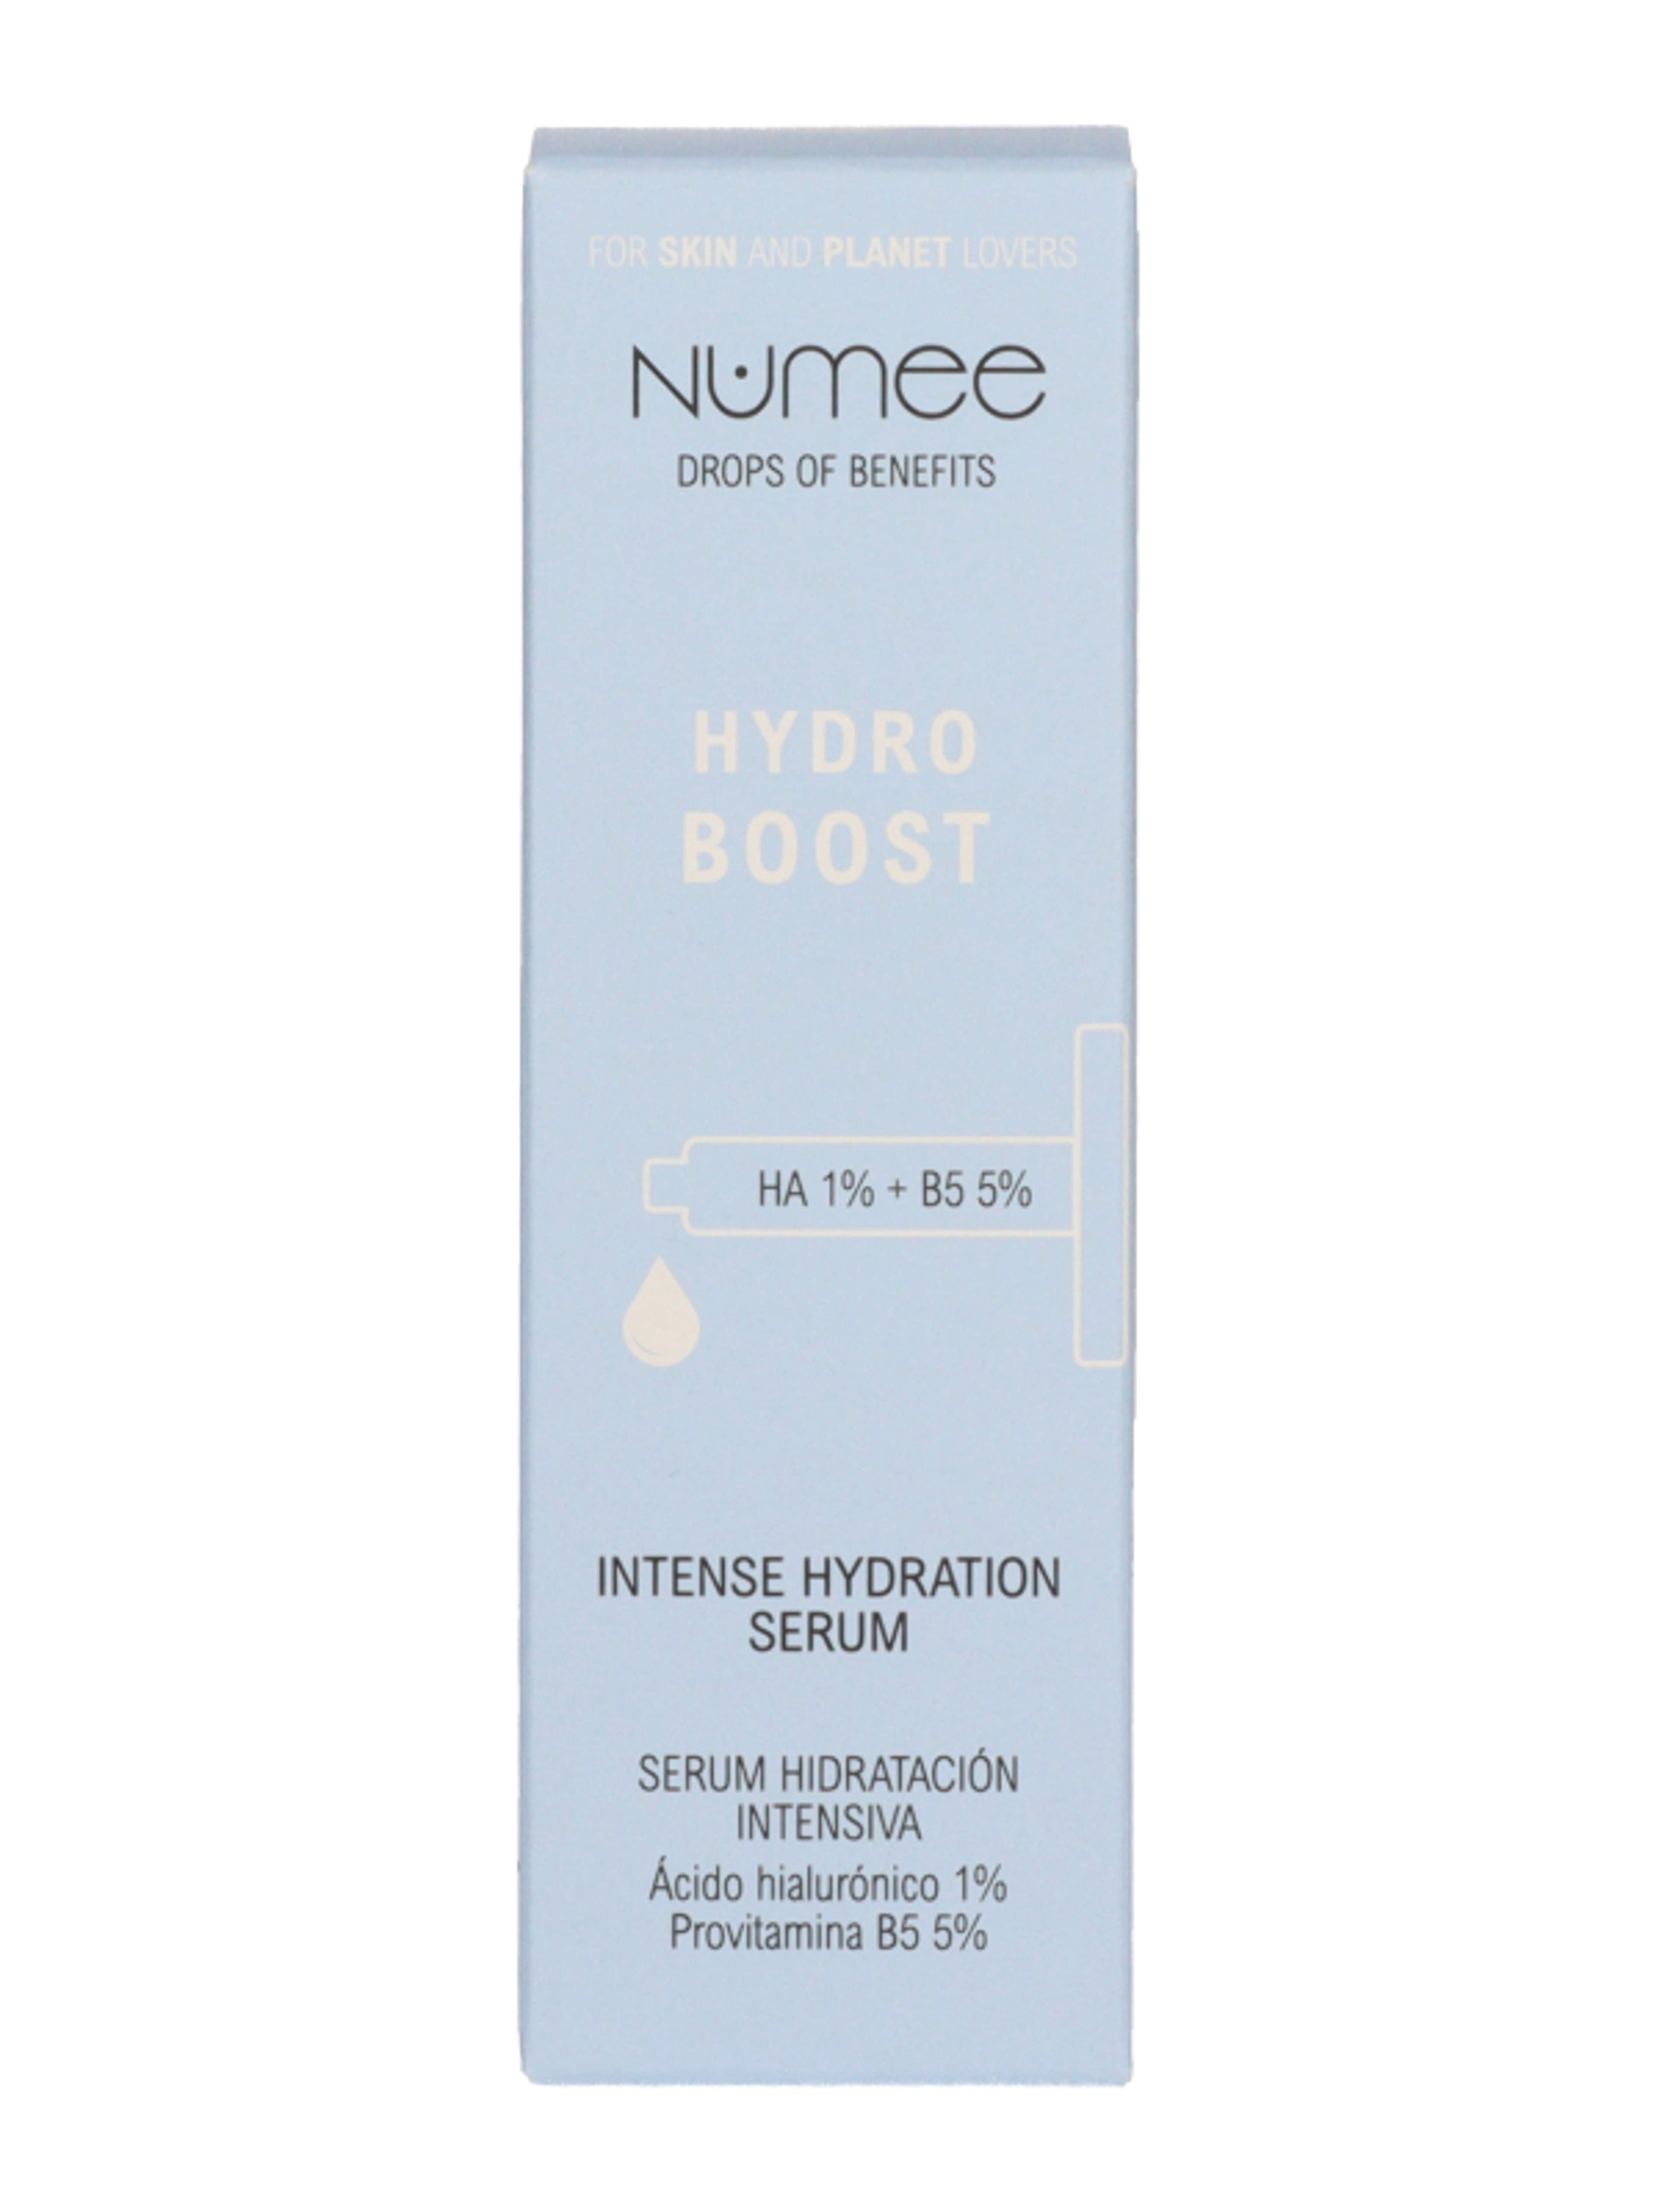 Numee Drops of Benefits Hydro Boost Hyaluronic Acid szérum - 30 ml